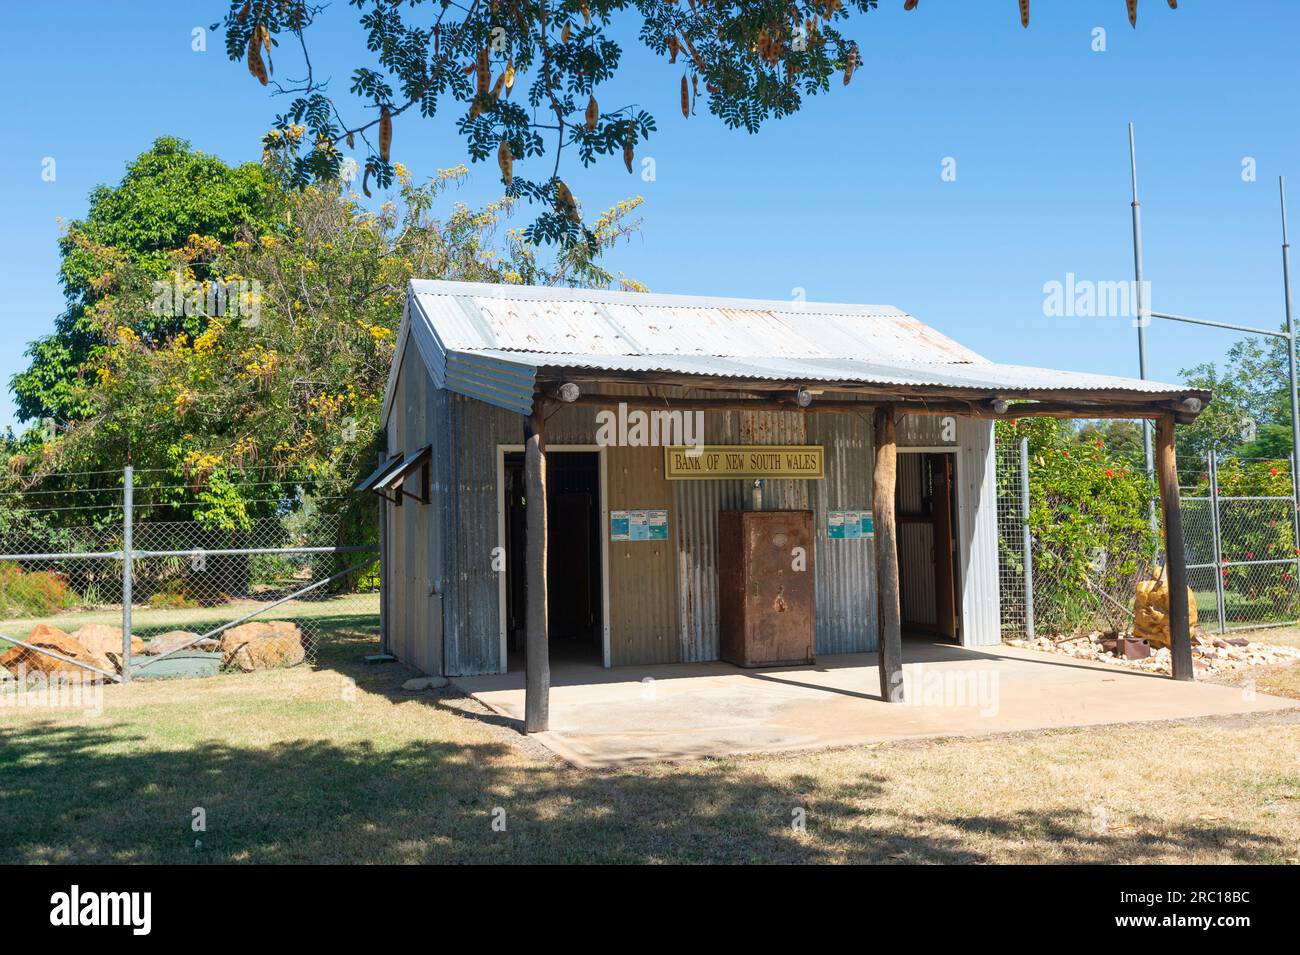 Old building at the visitors centre in the small rural town of Croydon, Gulf Savannah, Queensland, QLD, Australia Stock Photo